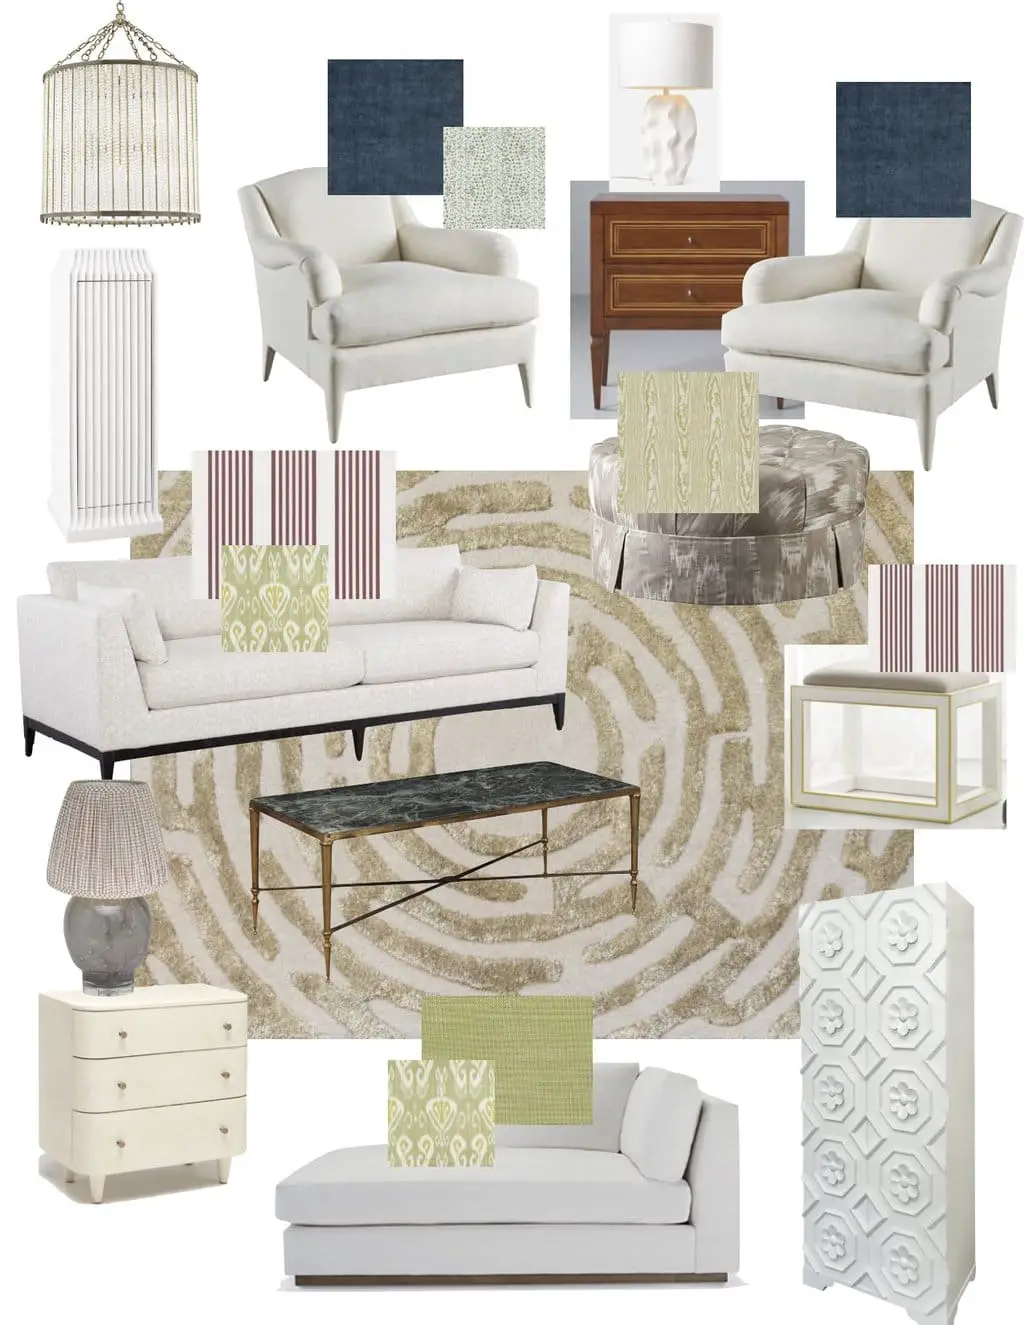 Living room design board for the One Room Challenge by Kevin O'Gara with mix of traditional and contemporary design, tufted rug, striped sofa, and velvet chairs on Thou Swell